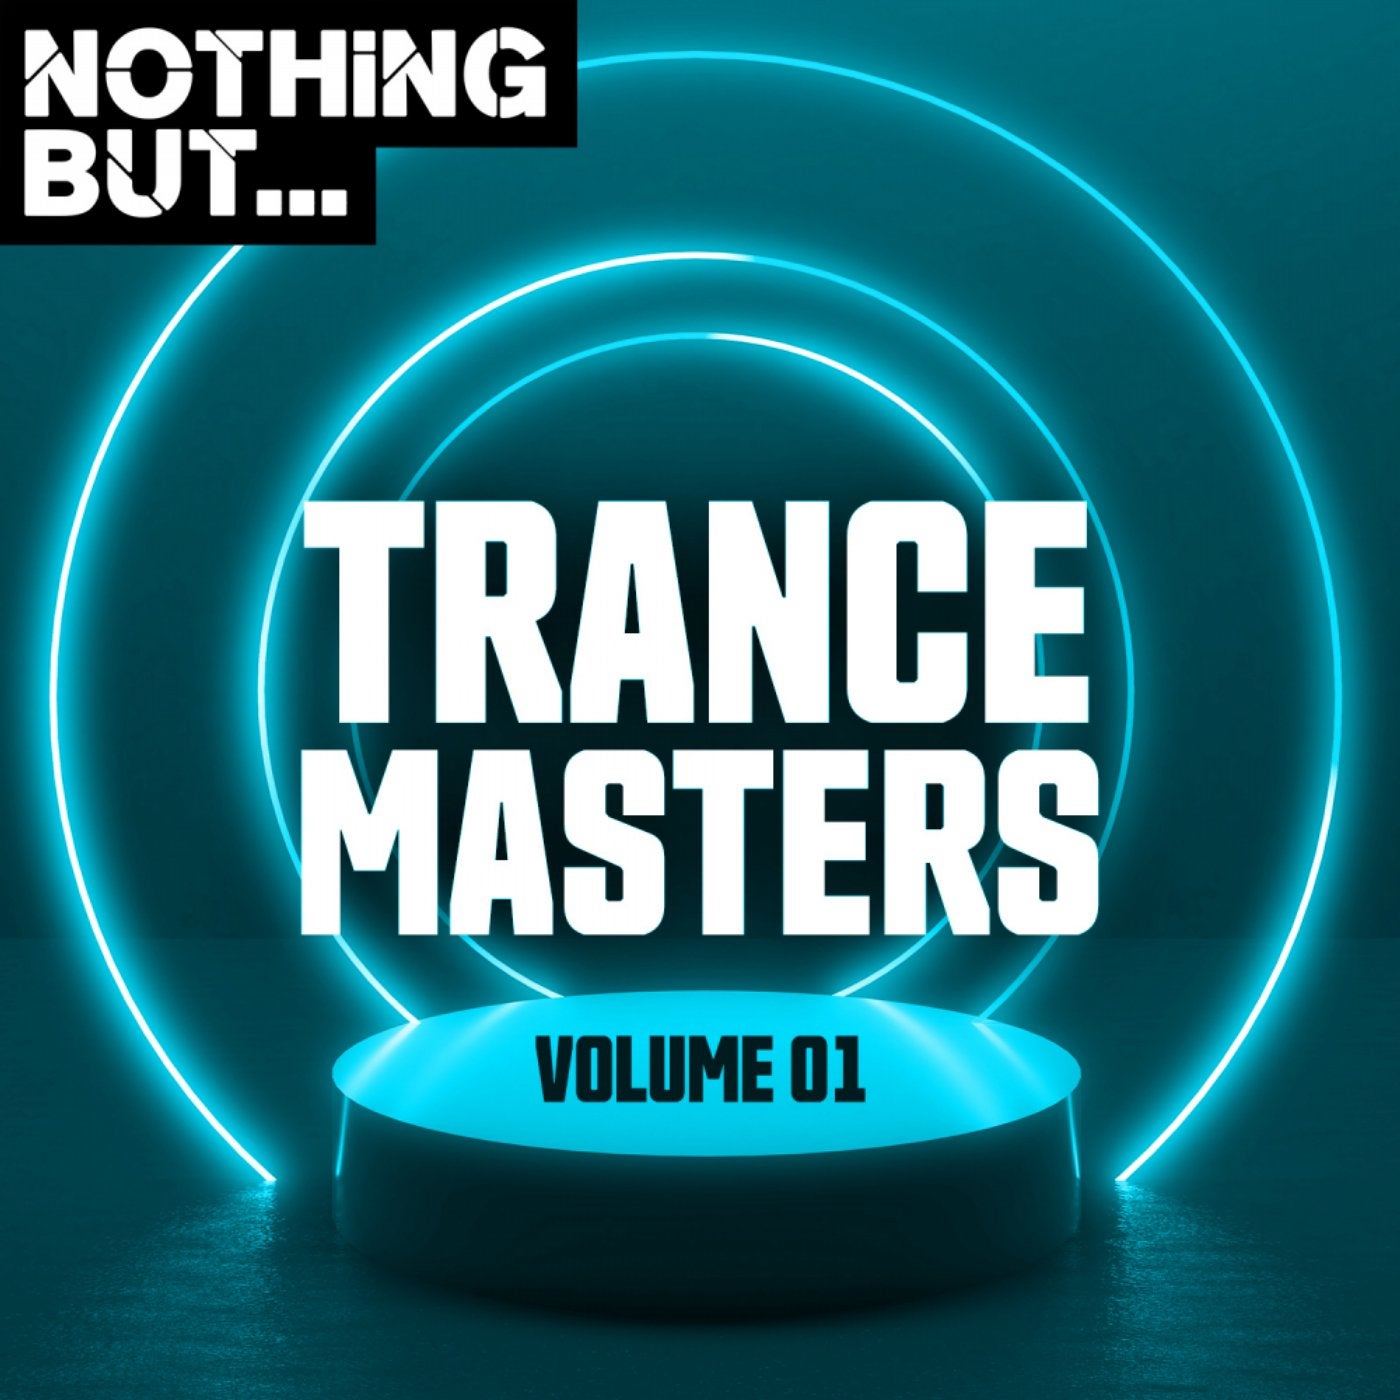 Nothing But... Trance Masters, Vol. 01